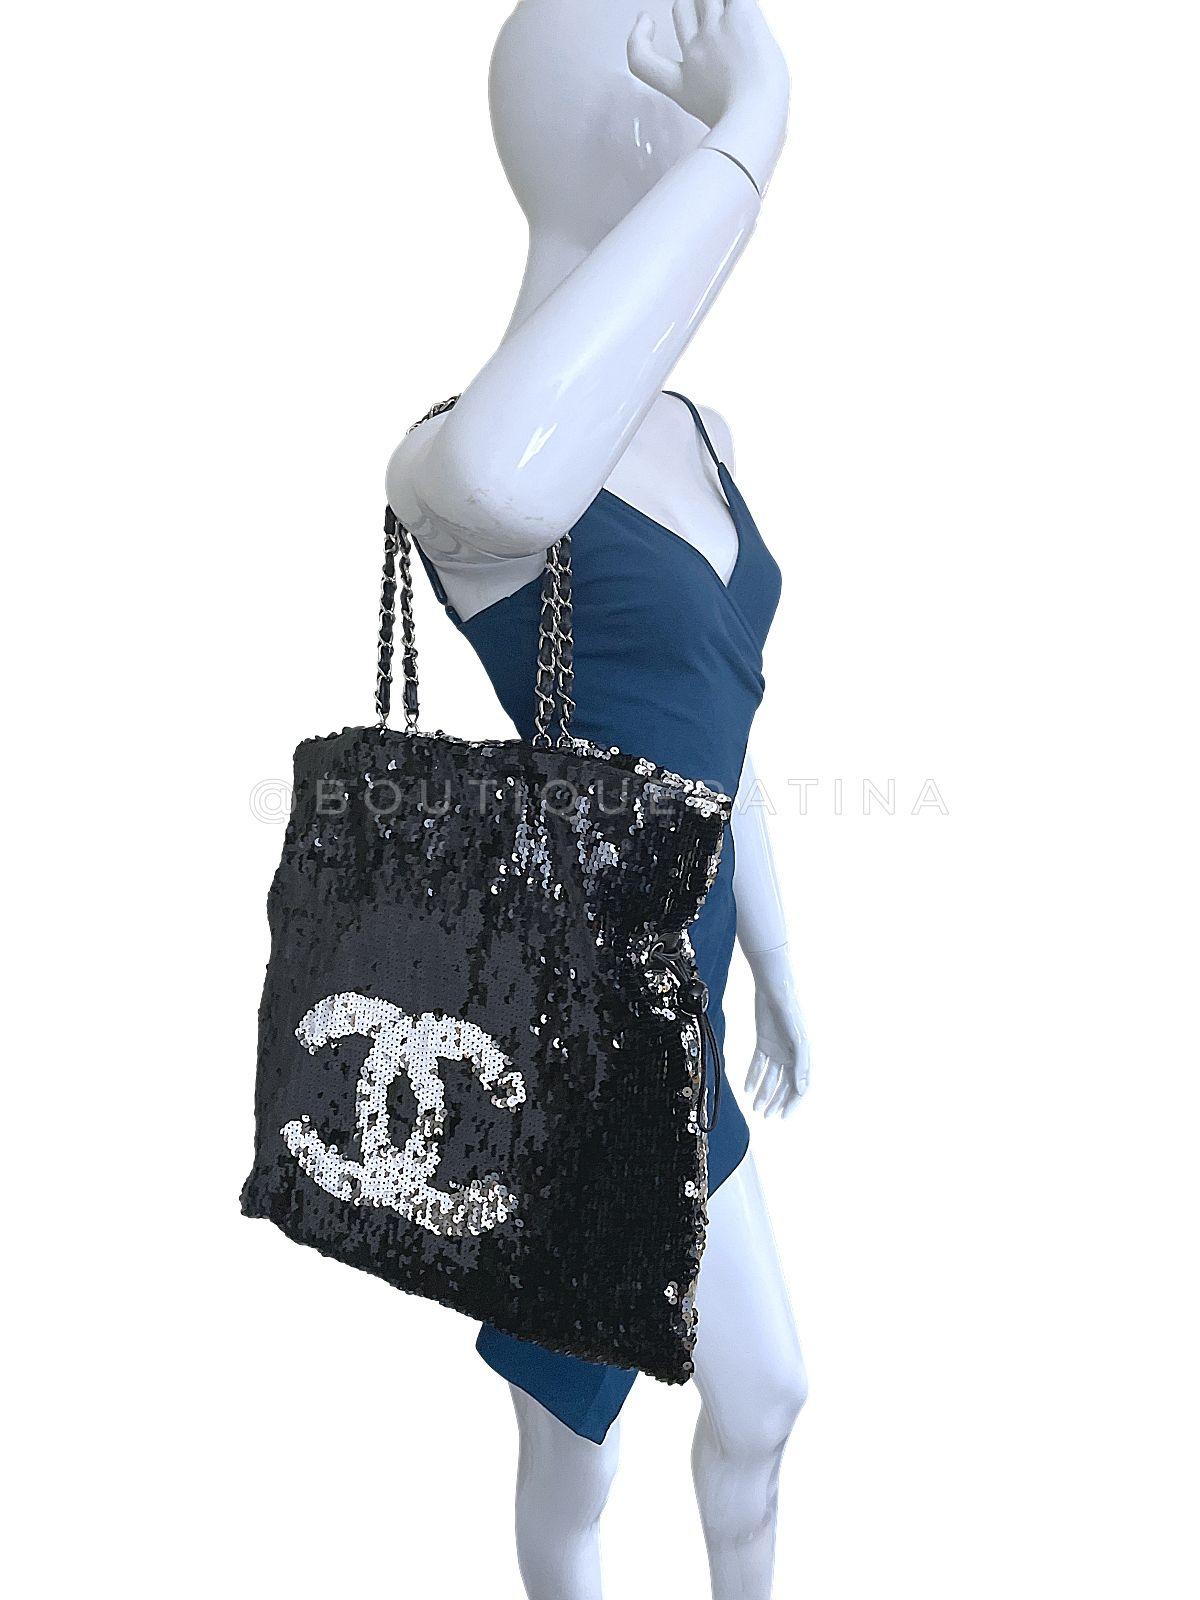 Chanel 2008 Limited XL Summer Nights Reversible Sequin Tote Bag 67793 For Sale 12